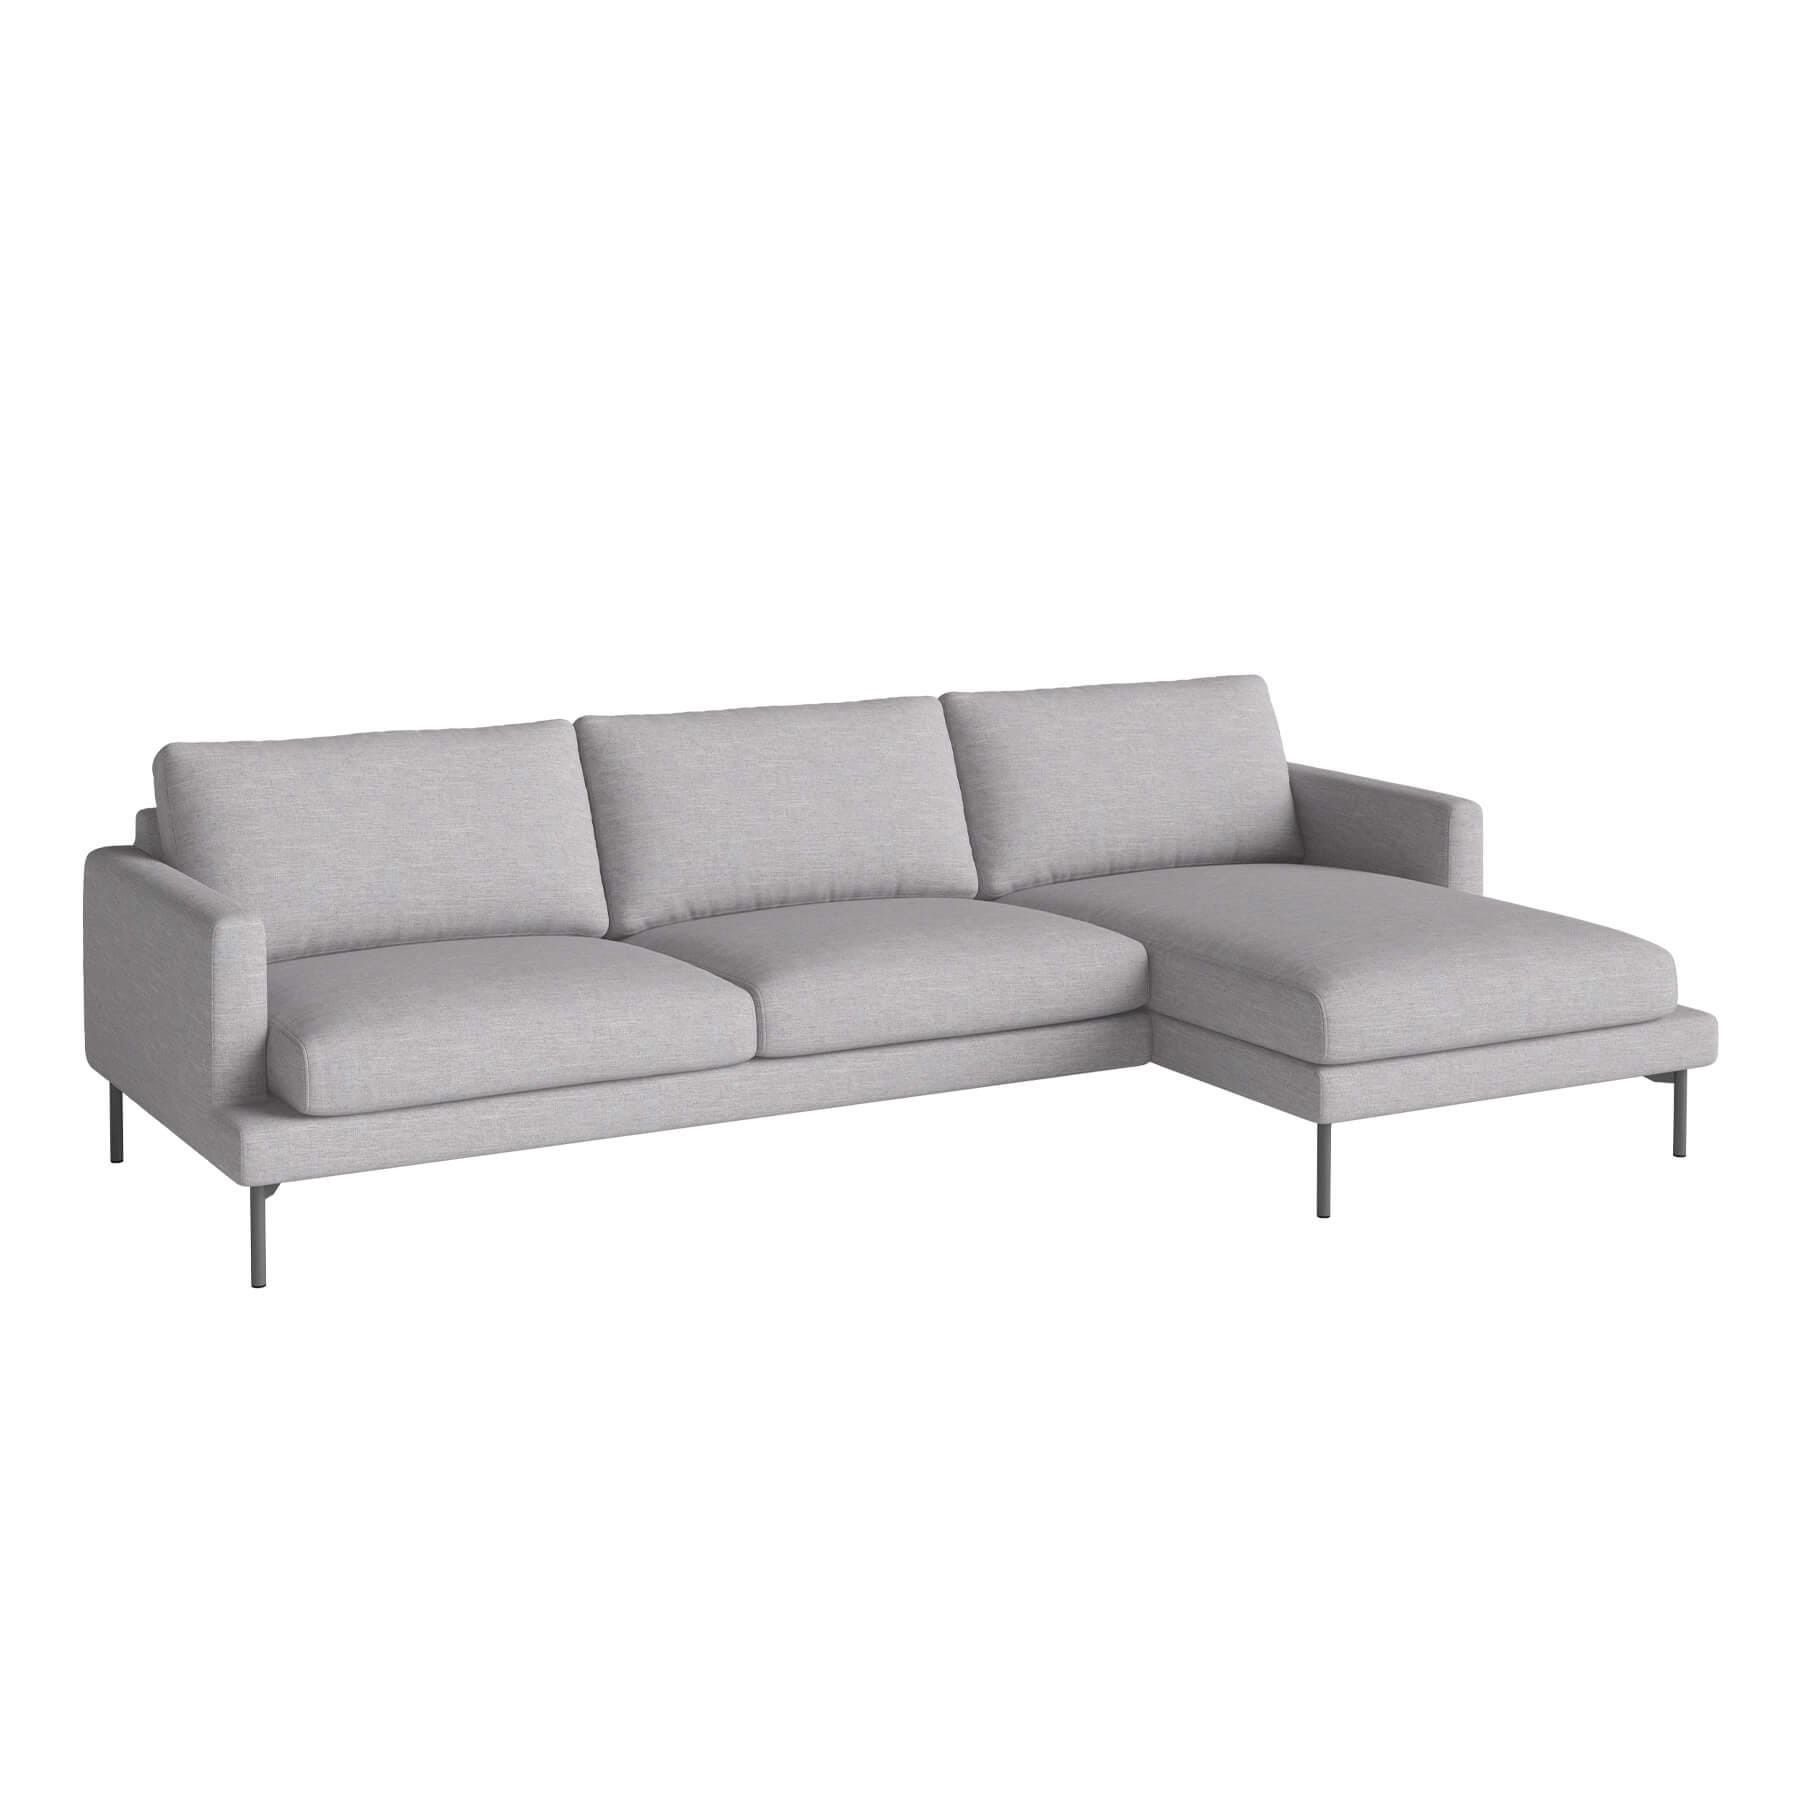 Bolia Veneda Sofa 35 Seater Sofa With Chaise Longue Grey Laquered Steel Baize Light Grey Right Designer Furniture From Holloways Of Ludlow